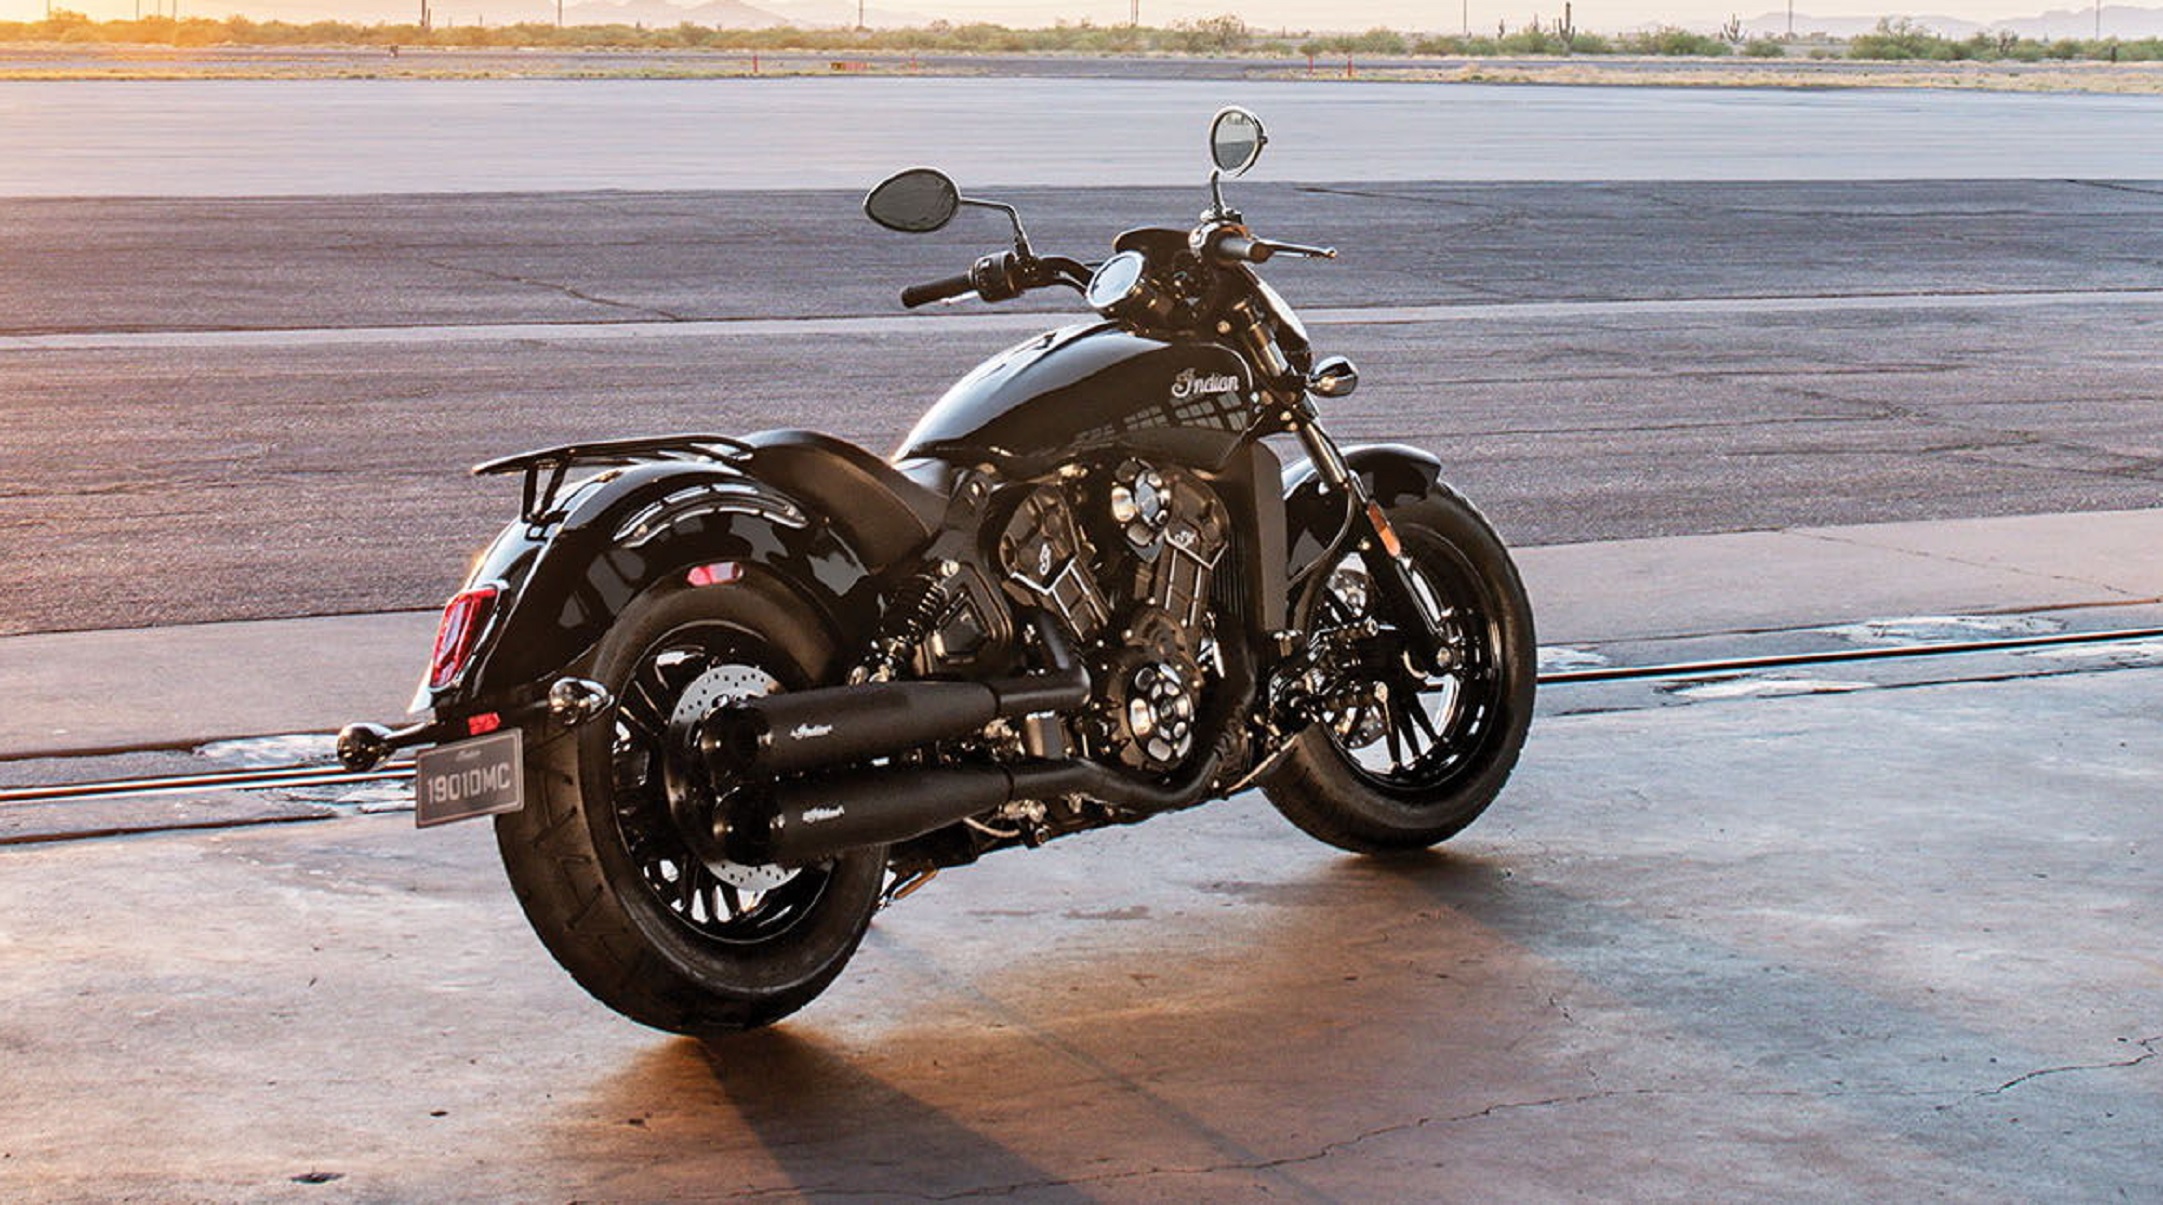 Does The Indian Scout Sixty Out Cruise Harley Davidson S Iron 883